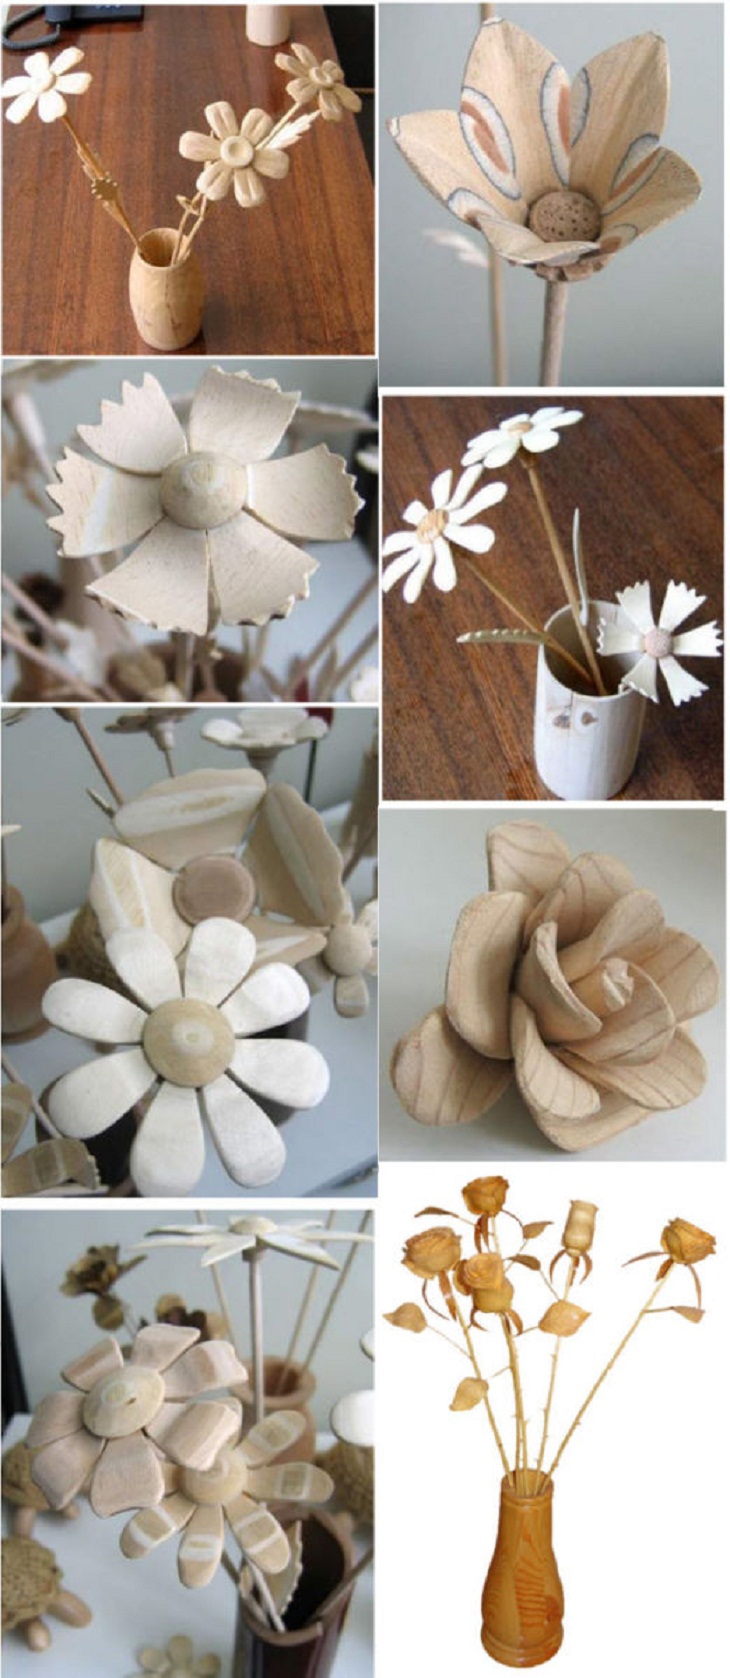 Woodworking Pieces, flowers